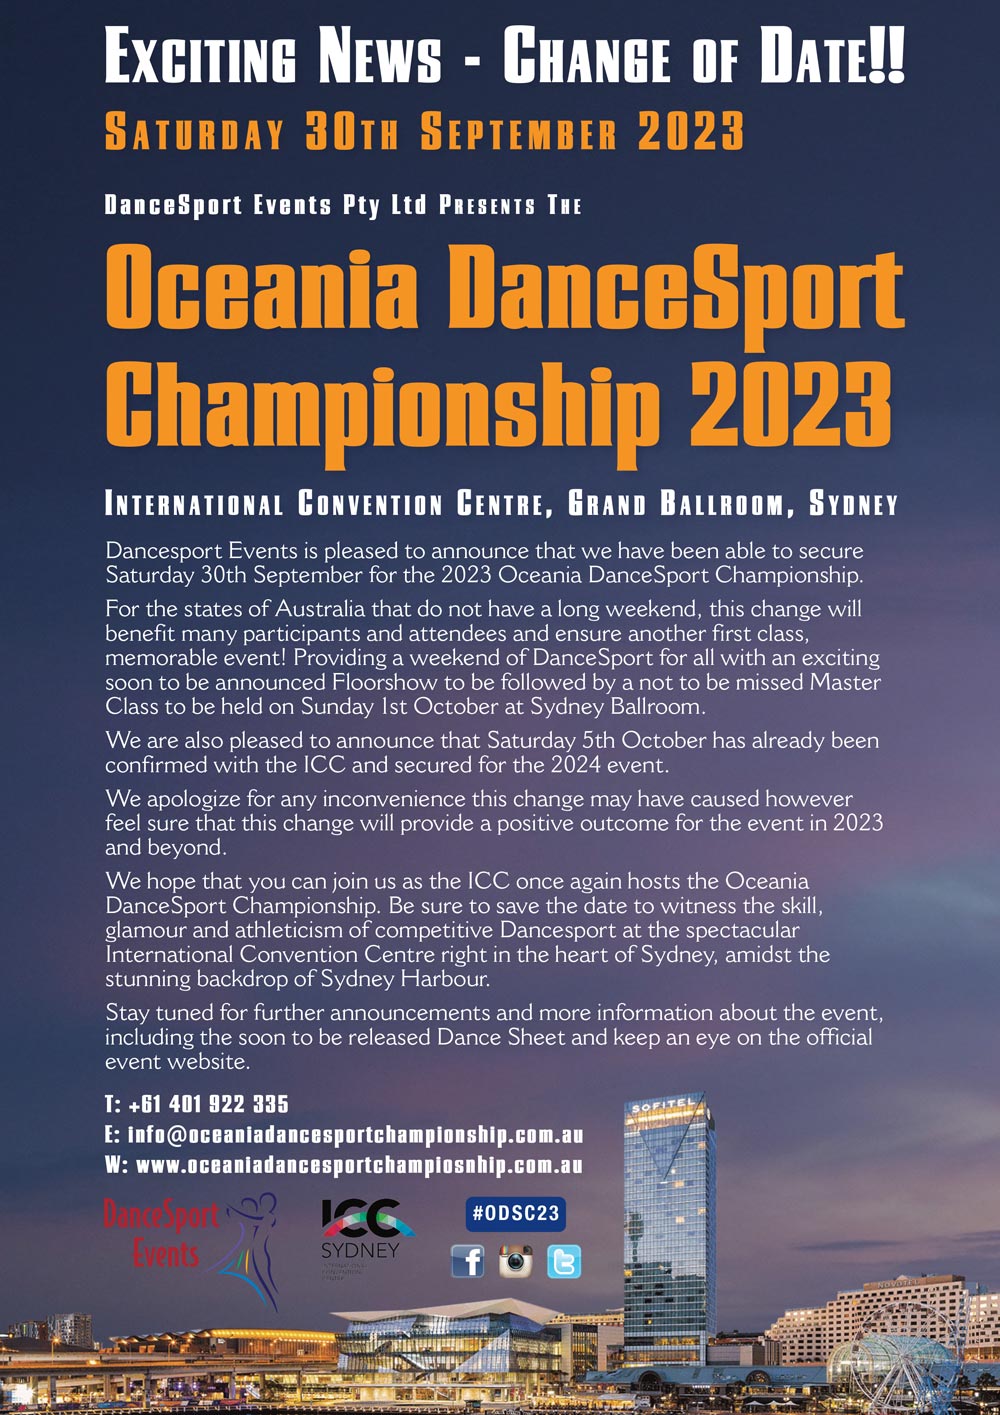 2023 Oceania Championship change of date information